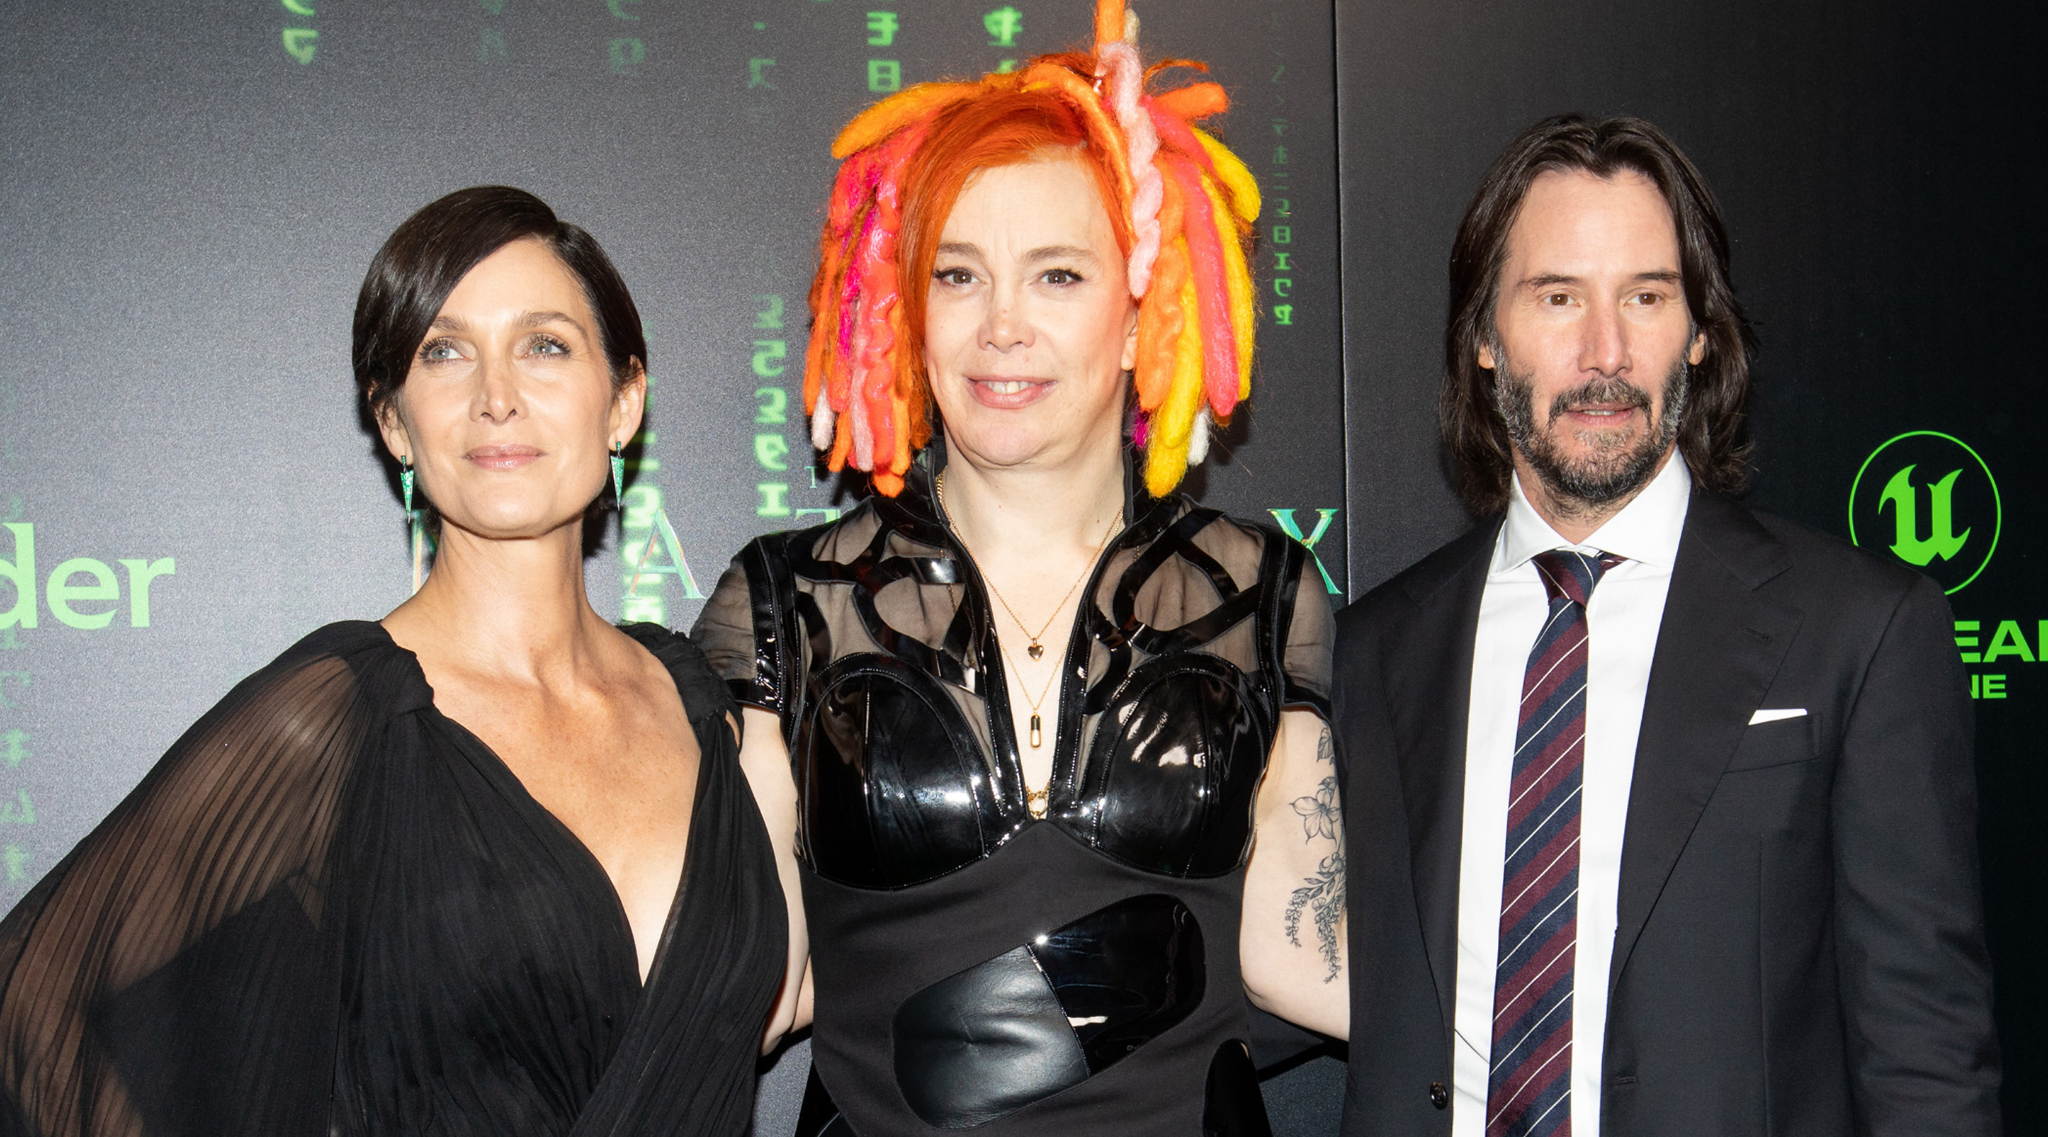 Wachowski Sisters Auctioning Off Rare 'The Matrix' Memorabilia to Protect and Defend Trans Youth